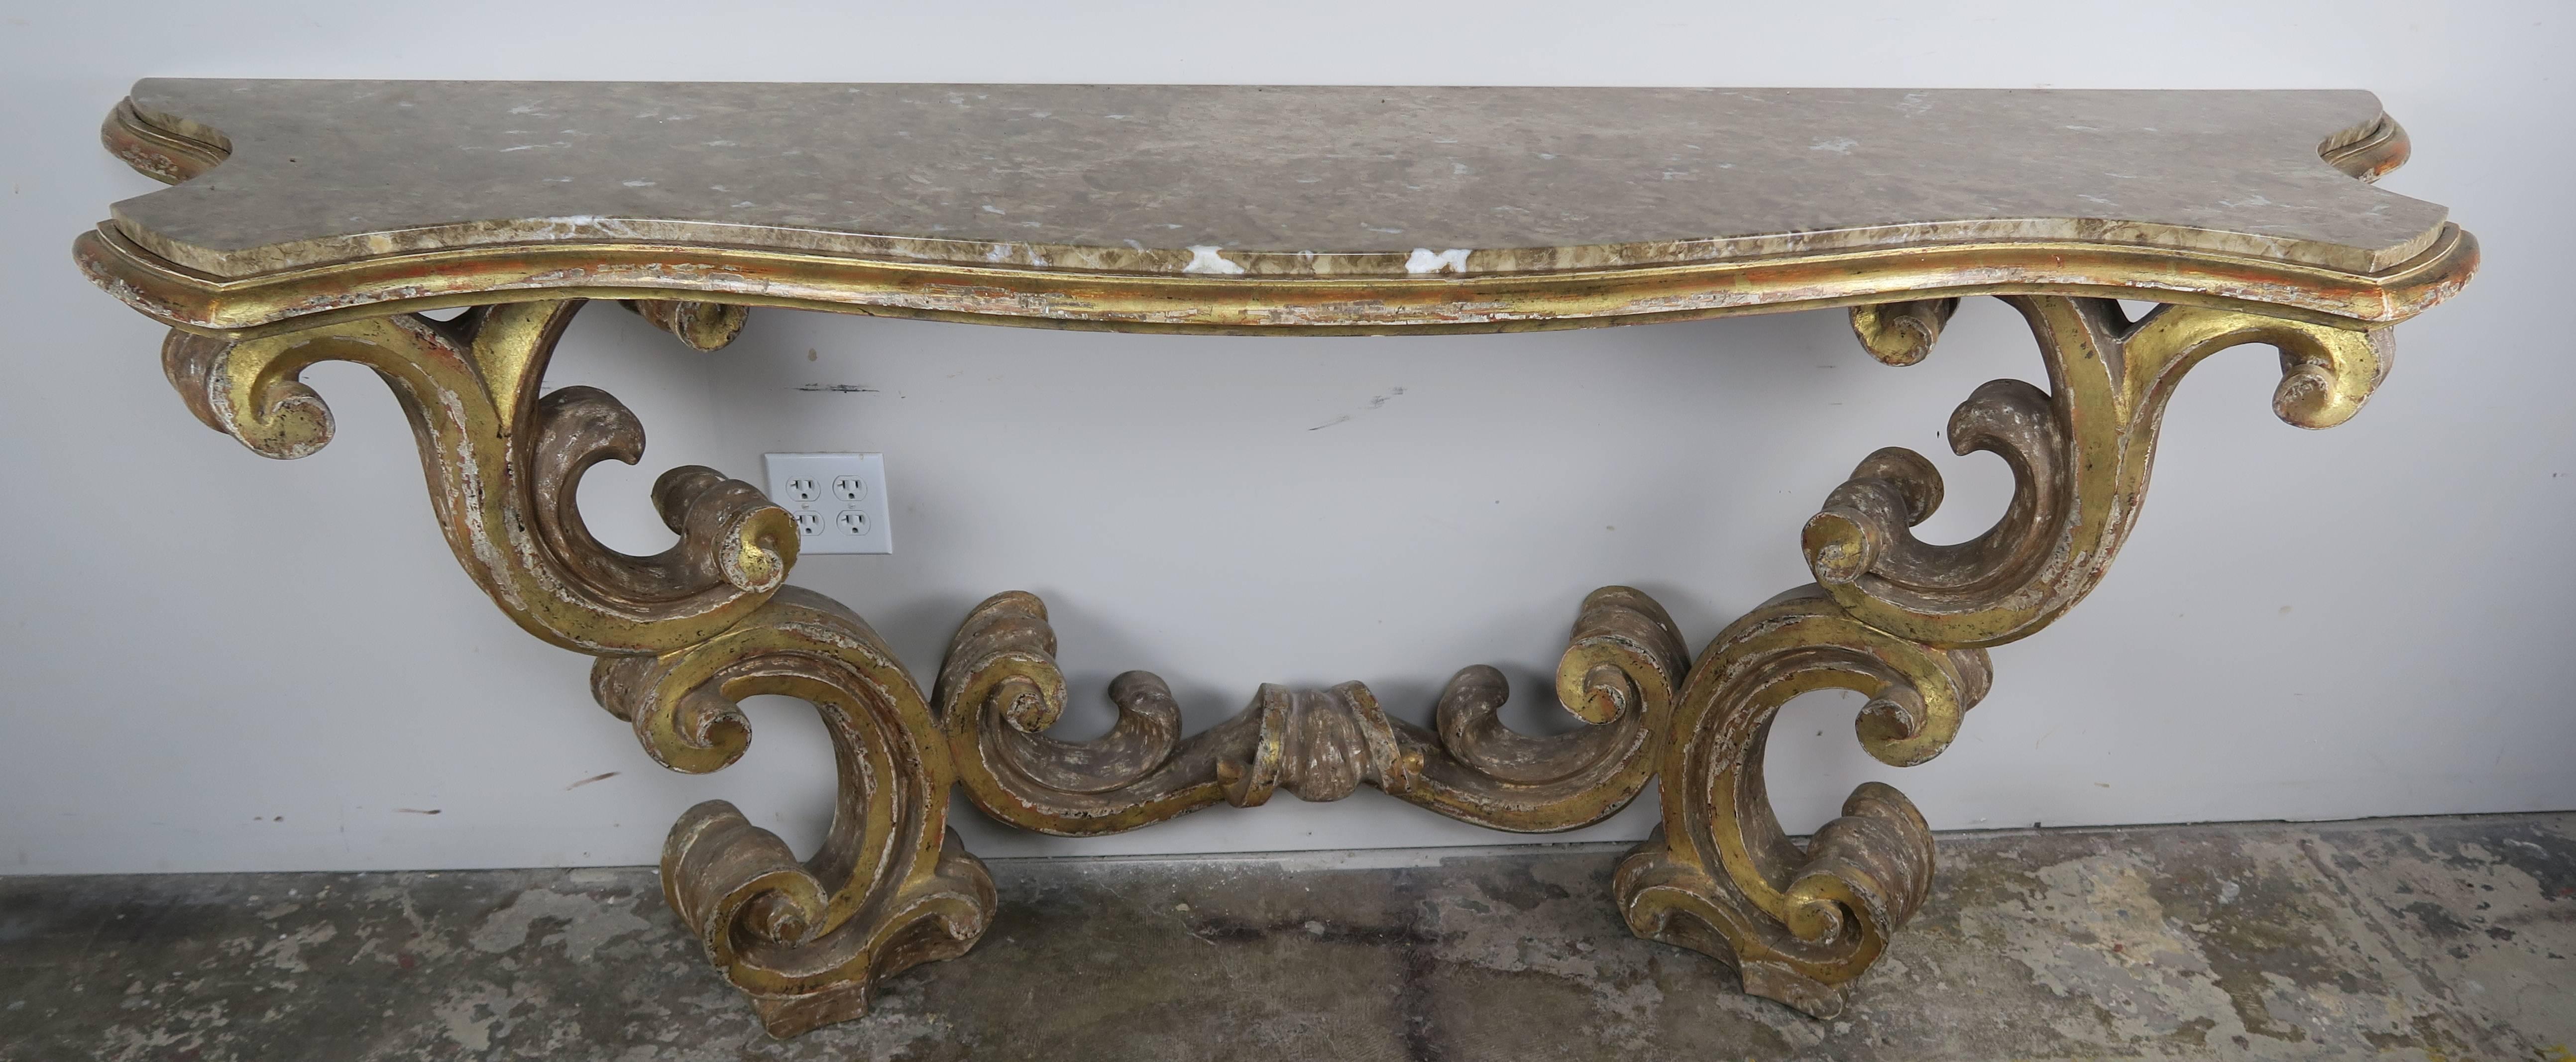 Italian Baroque style giltwood carved console with inset marble top.